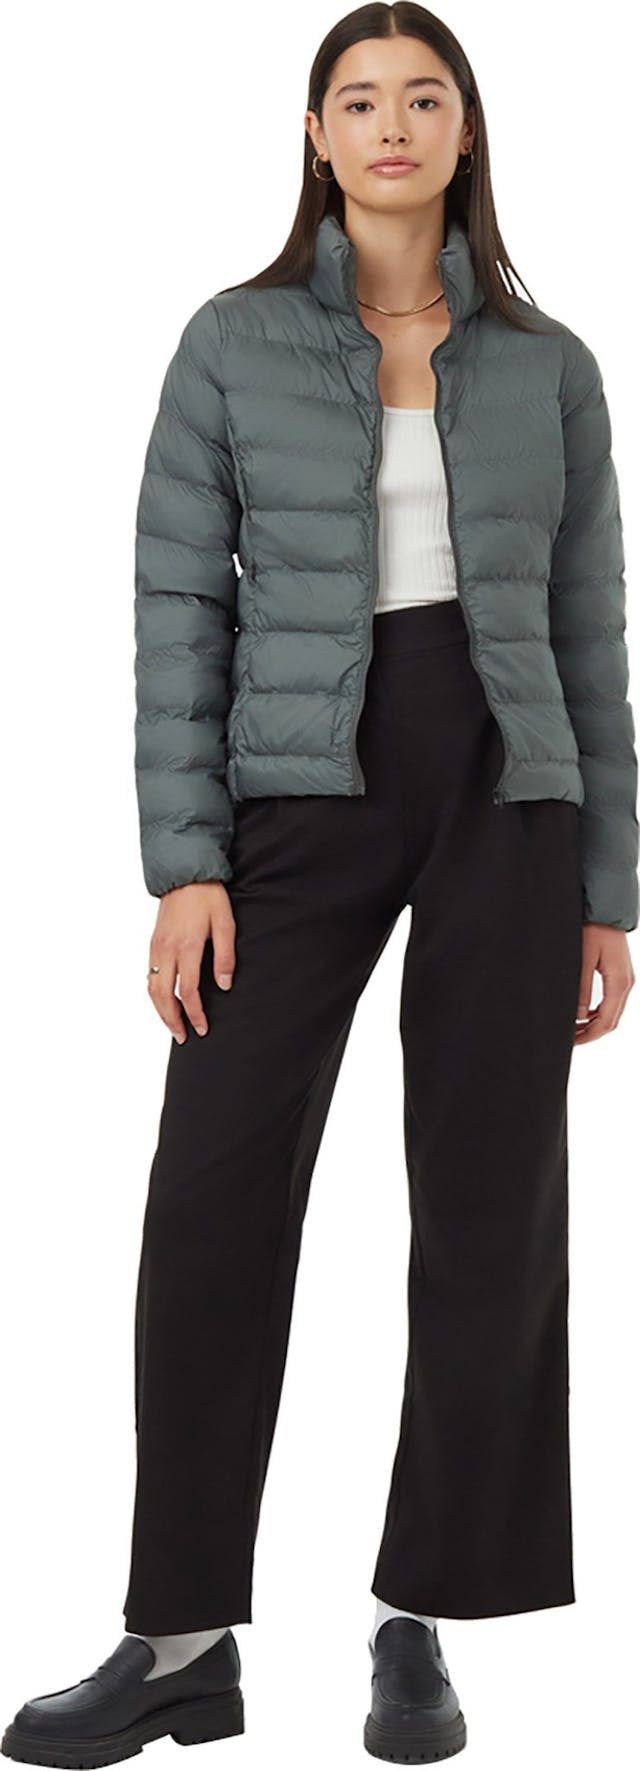 Product image for Packable Puffer Jacket - Women's